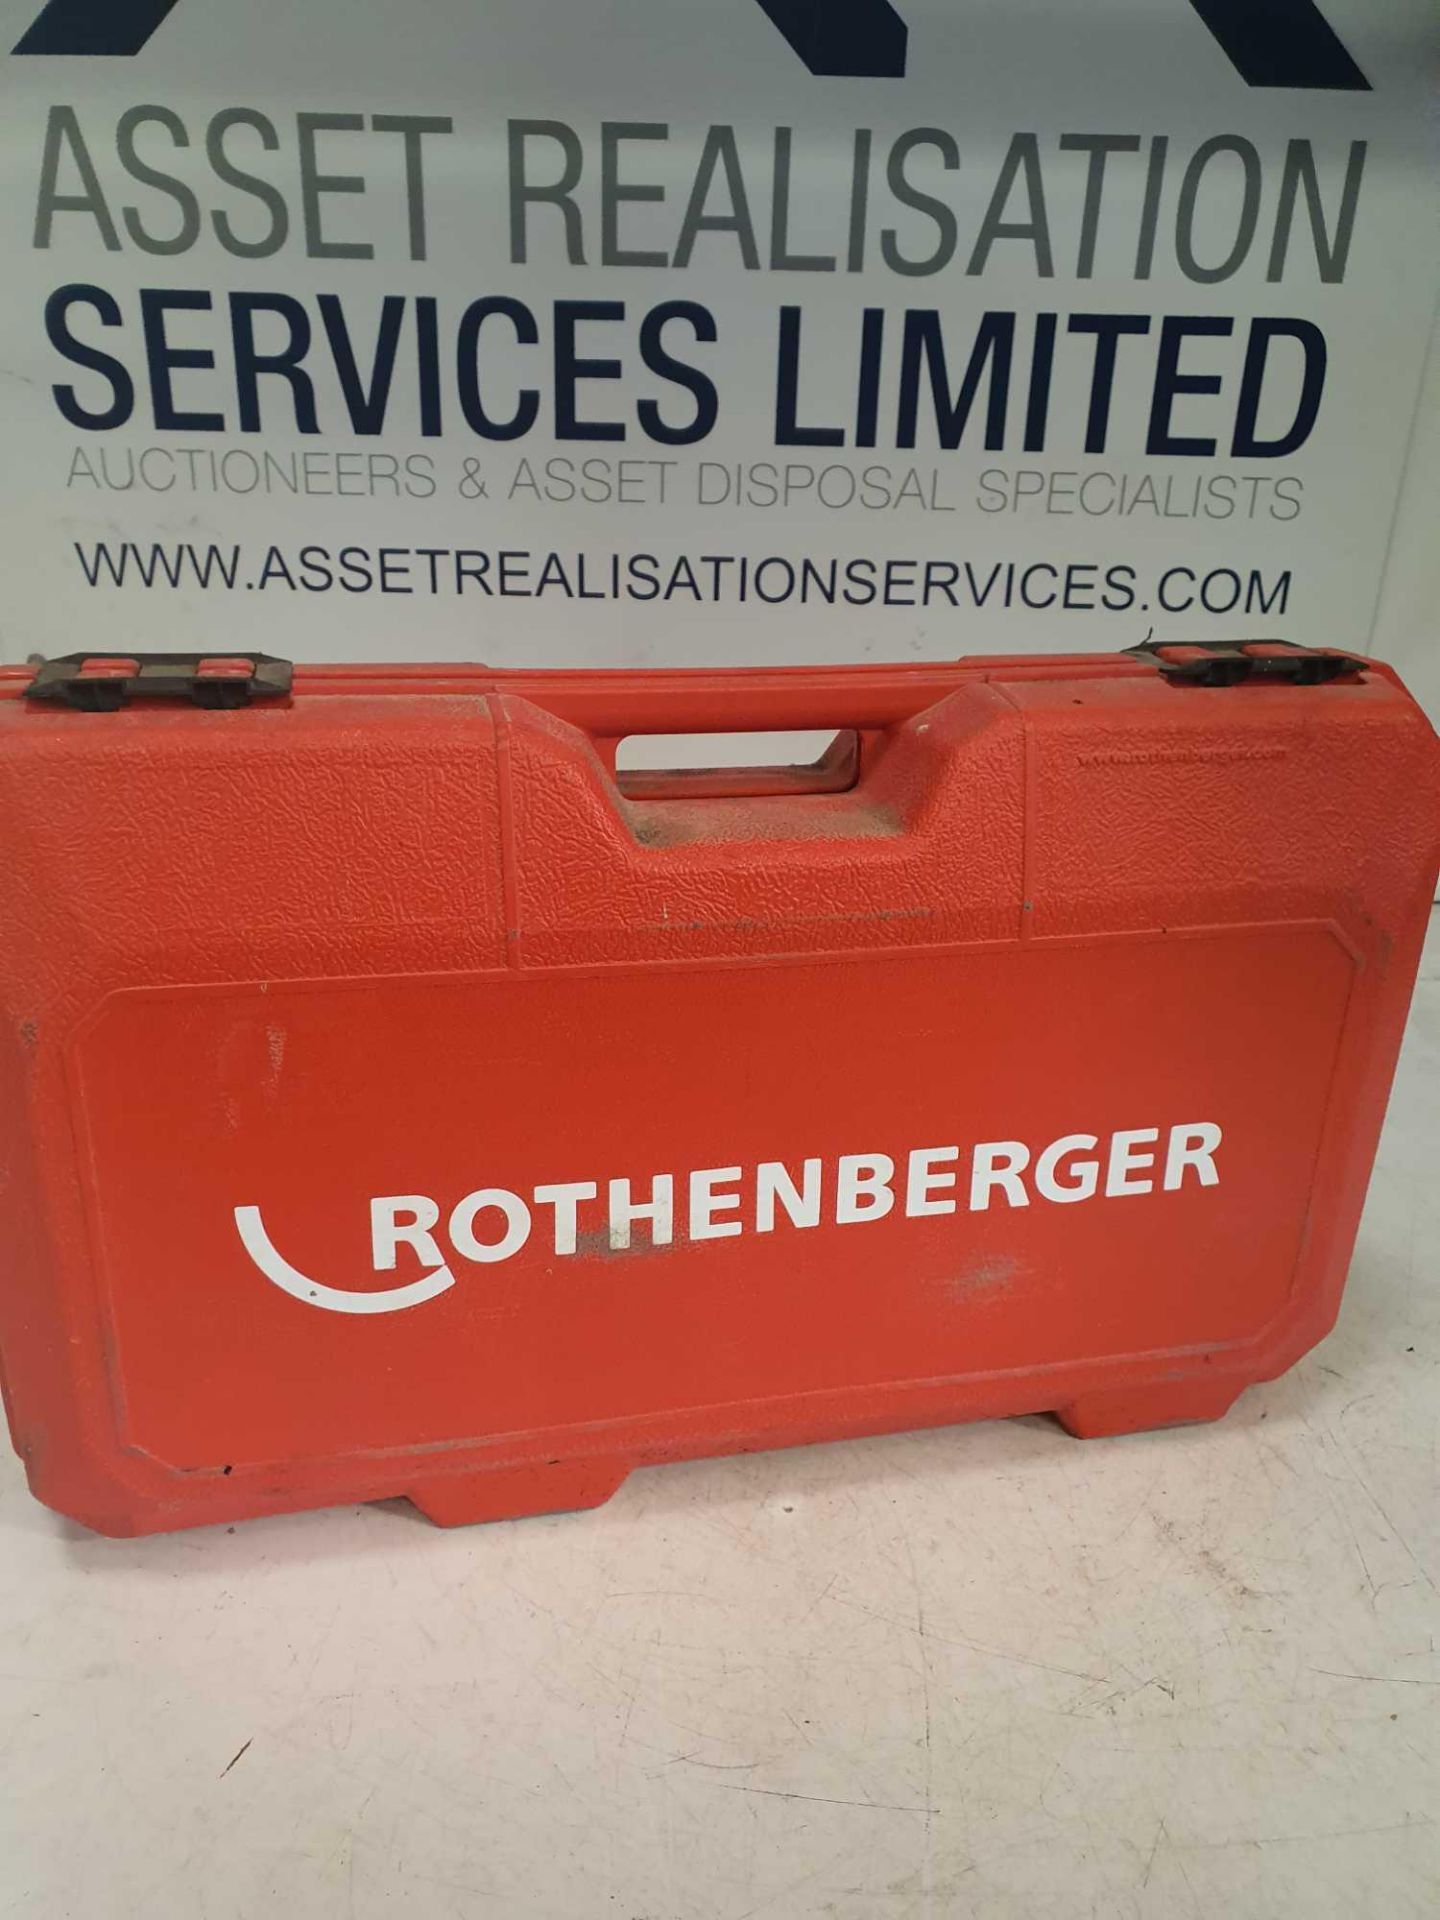 ROTHENBERGER SUPERTRONIC 2000 HAND-HELD PIPE THREA